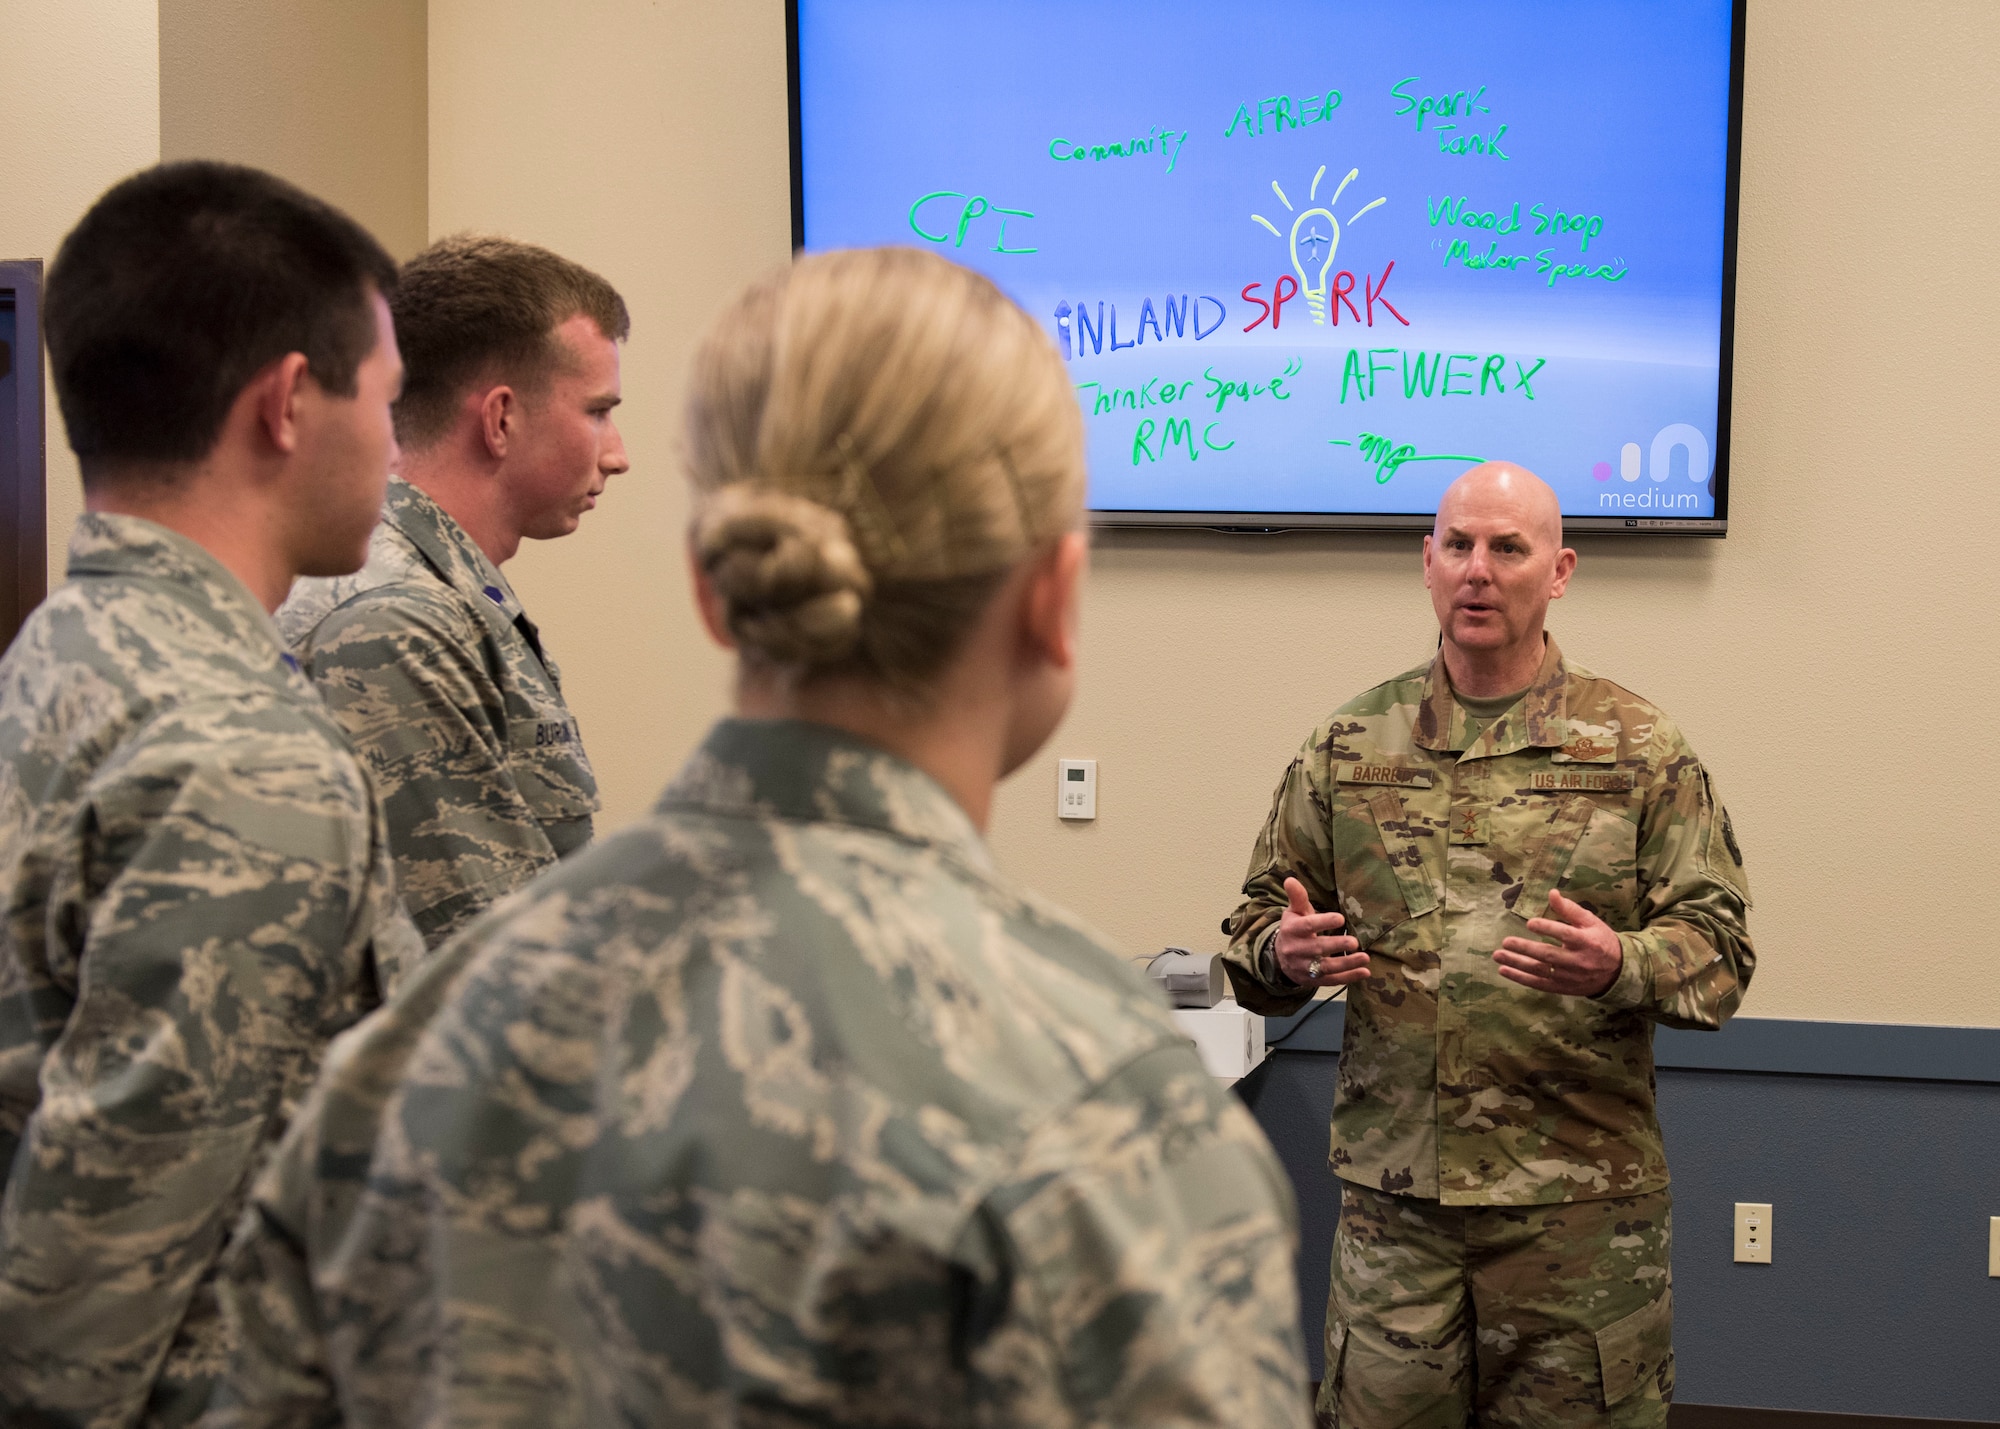 Maj. Gen. Sam Barrett, 18th Air Force commander, talks with Reserve Officer Training Corps cadets while visiting the base’s new Inland Spark thinker space during a base visit May 22, 2019 at Fairchild Air Force Base, Washington. The thinker space is part of an Air Force-wide initiative to develop an innovative culture so Airmen can develop ideas to assist workflow, increase efficiency and invent new technologies to keep the U.S. military ahead of evolving global challenges. (U.S. Air Force photo by Senior Airman Ryan Lackey)